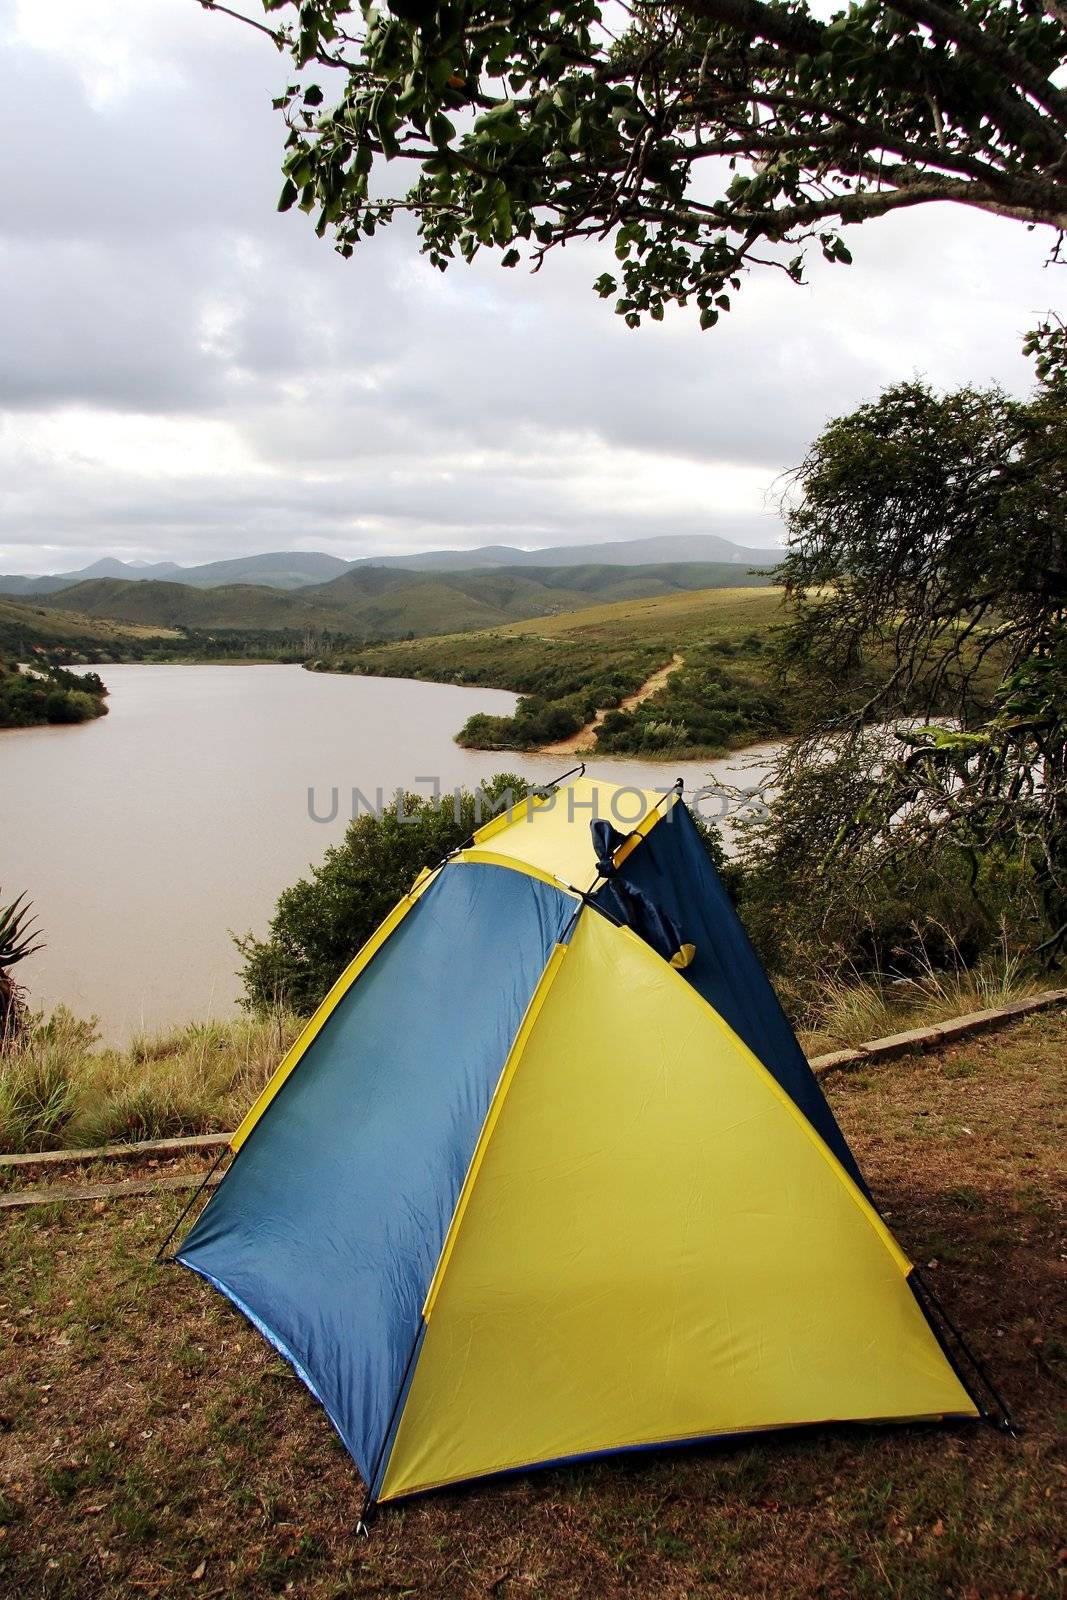 Small Tent at a Dam by fouroaks